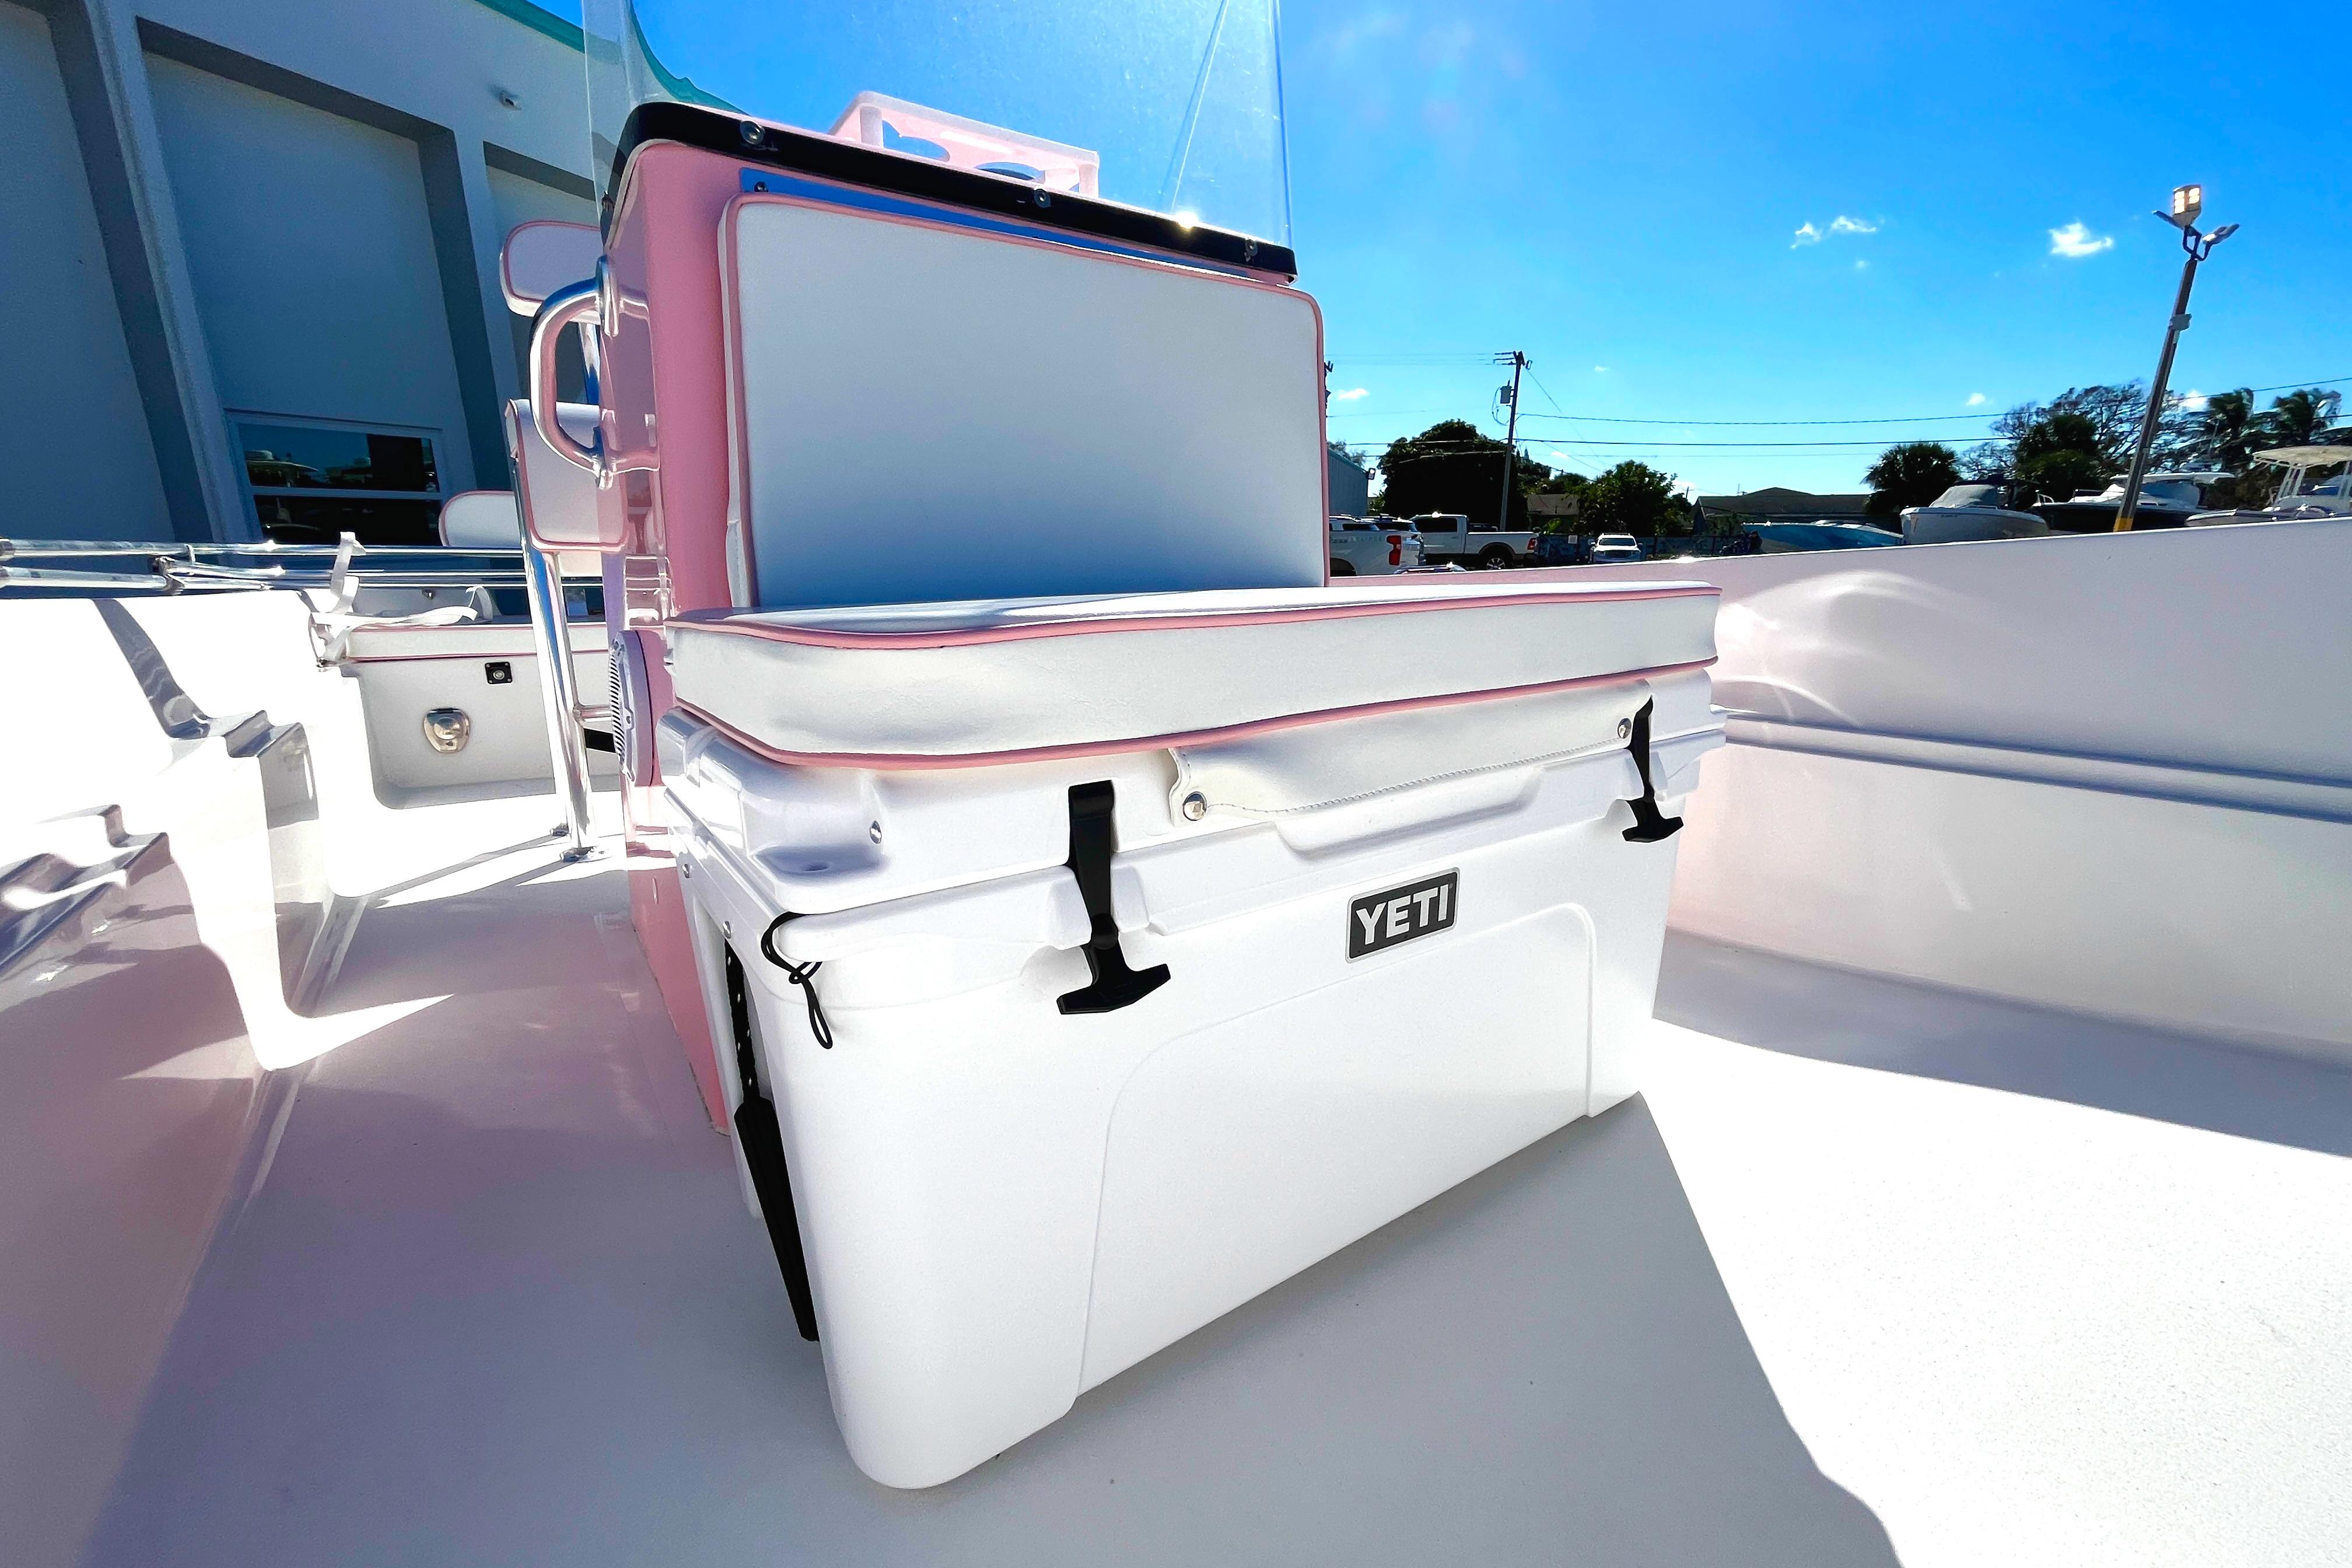 Palm Yacht 17 - Yeti Cooler with forward seating